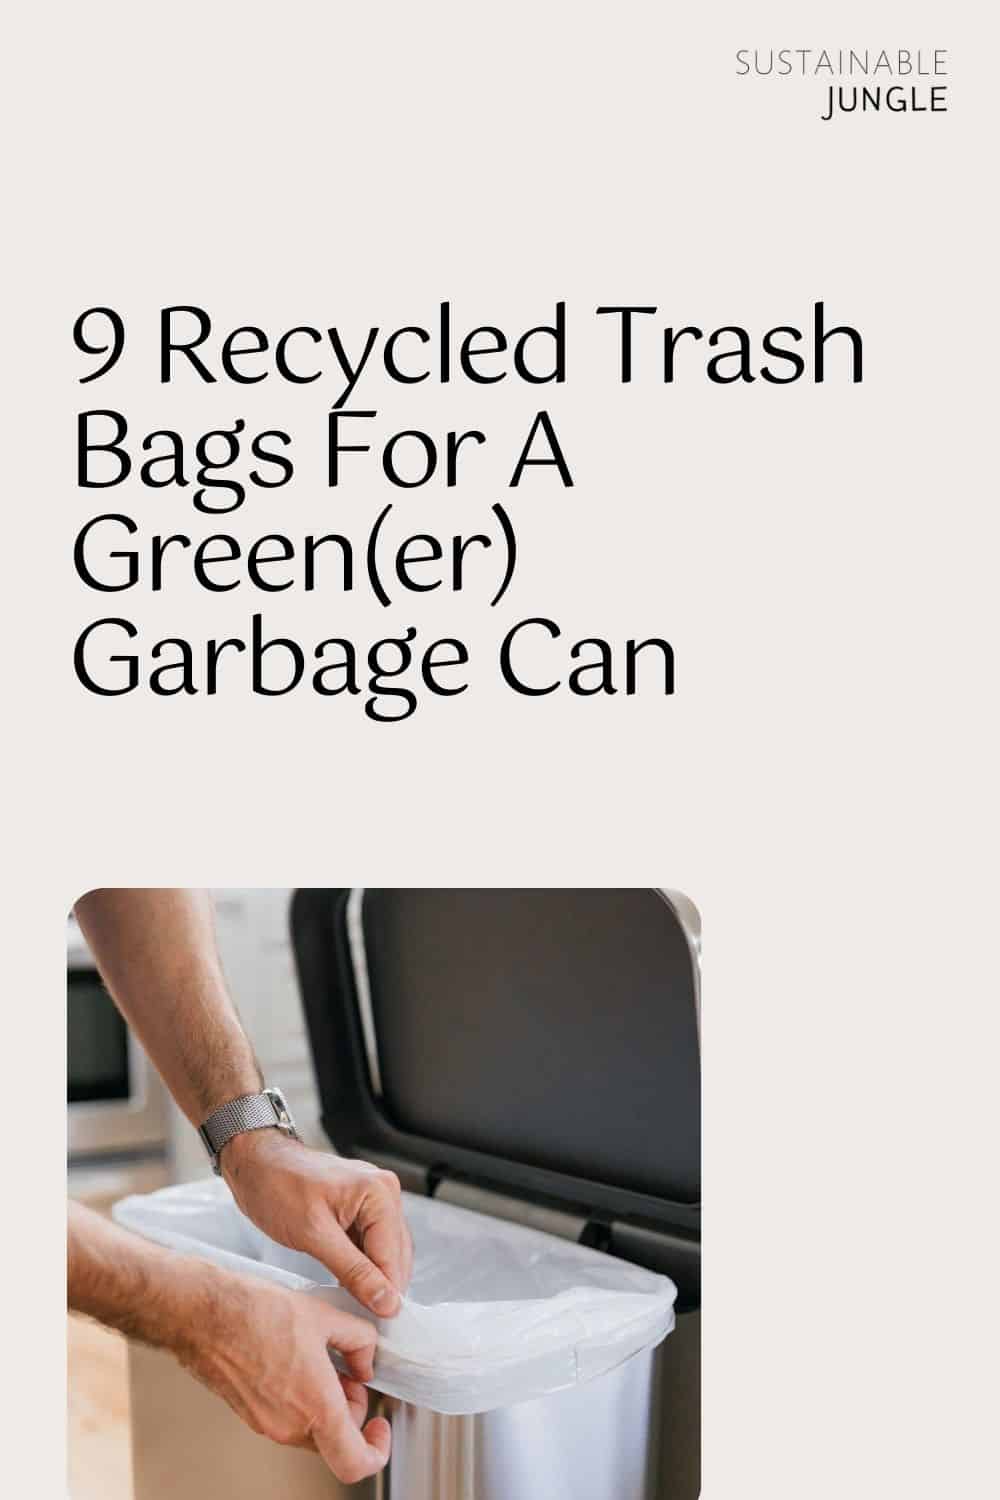 9 Recycled Trash Bags For A Green(er) Garbage Can Image by simplehuman #recycledtrashbags #recycledgarbagebags #recycledplastictrashbags #garbagebagsmadefromrecycledplastic #ecofriendlytrashbags #ecofriendlygarbagebags #sustainablejungle